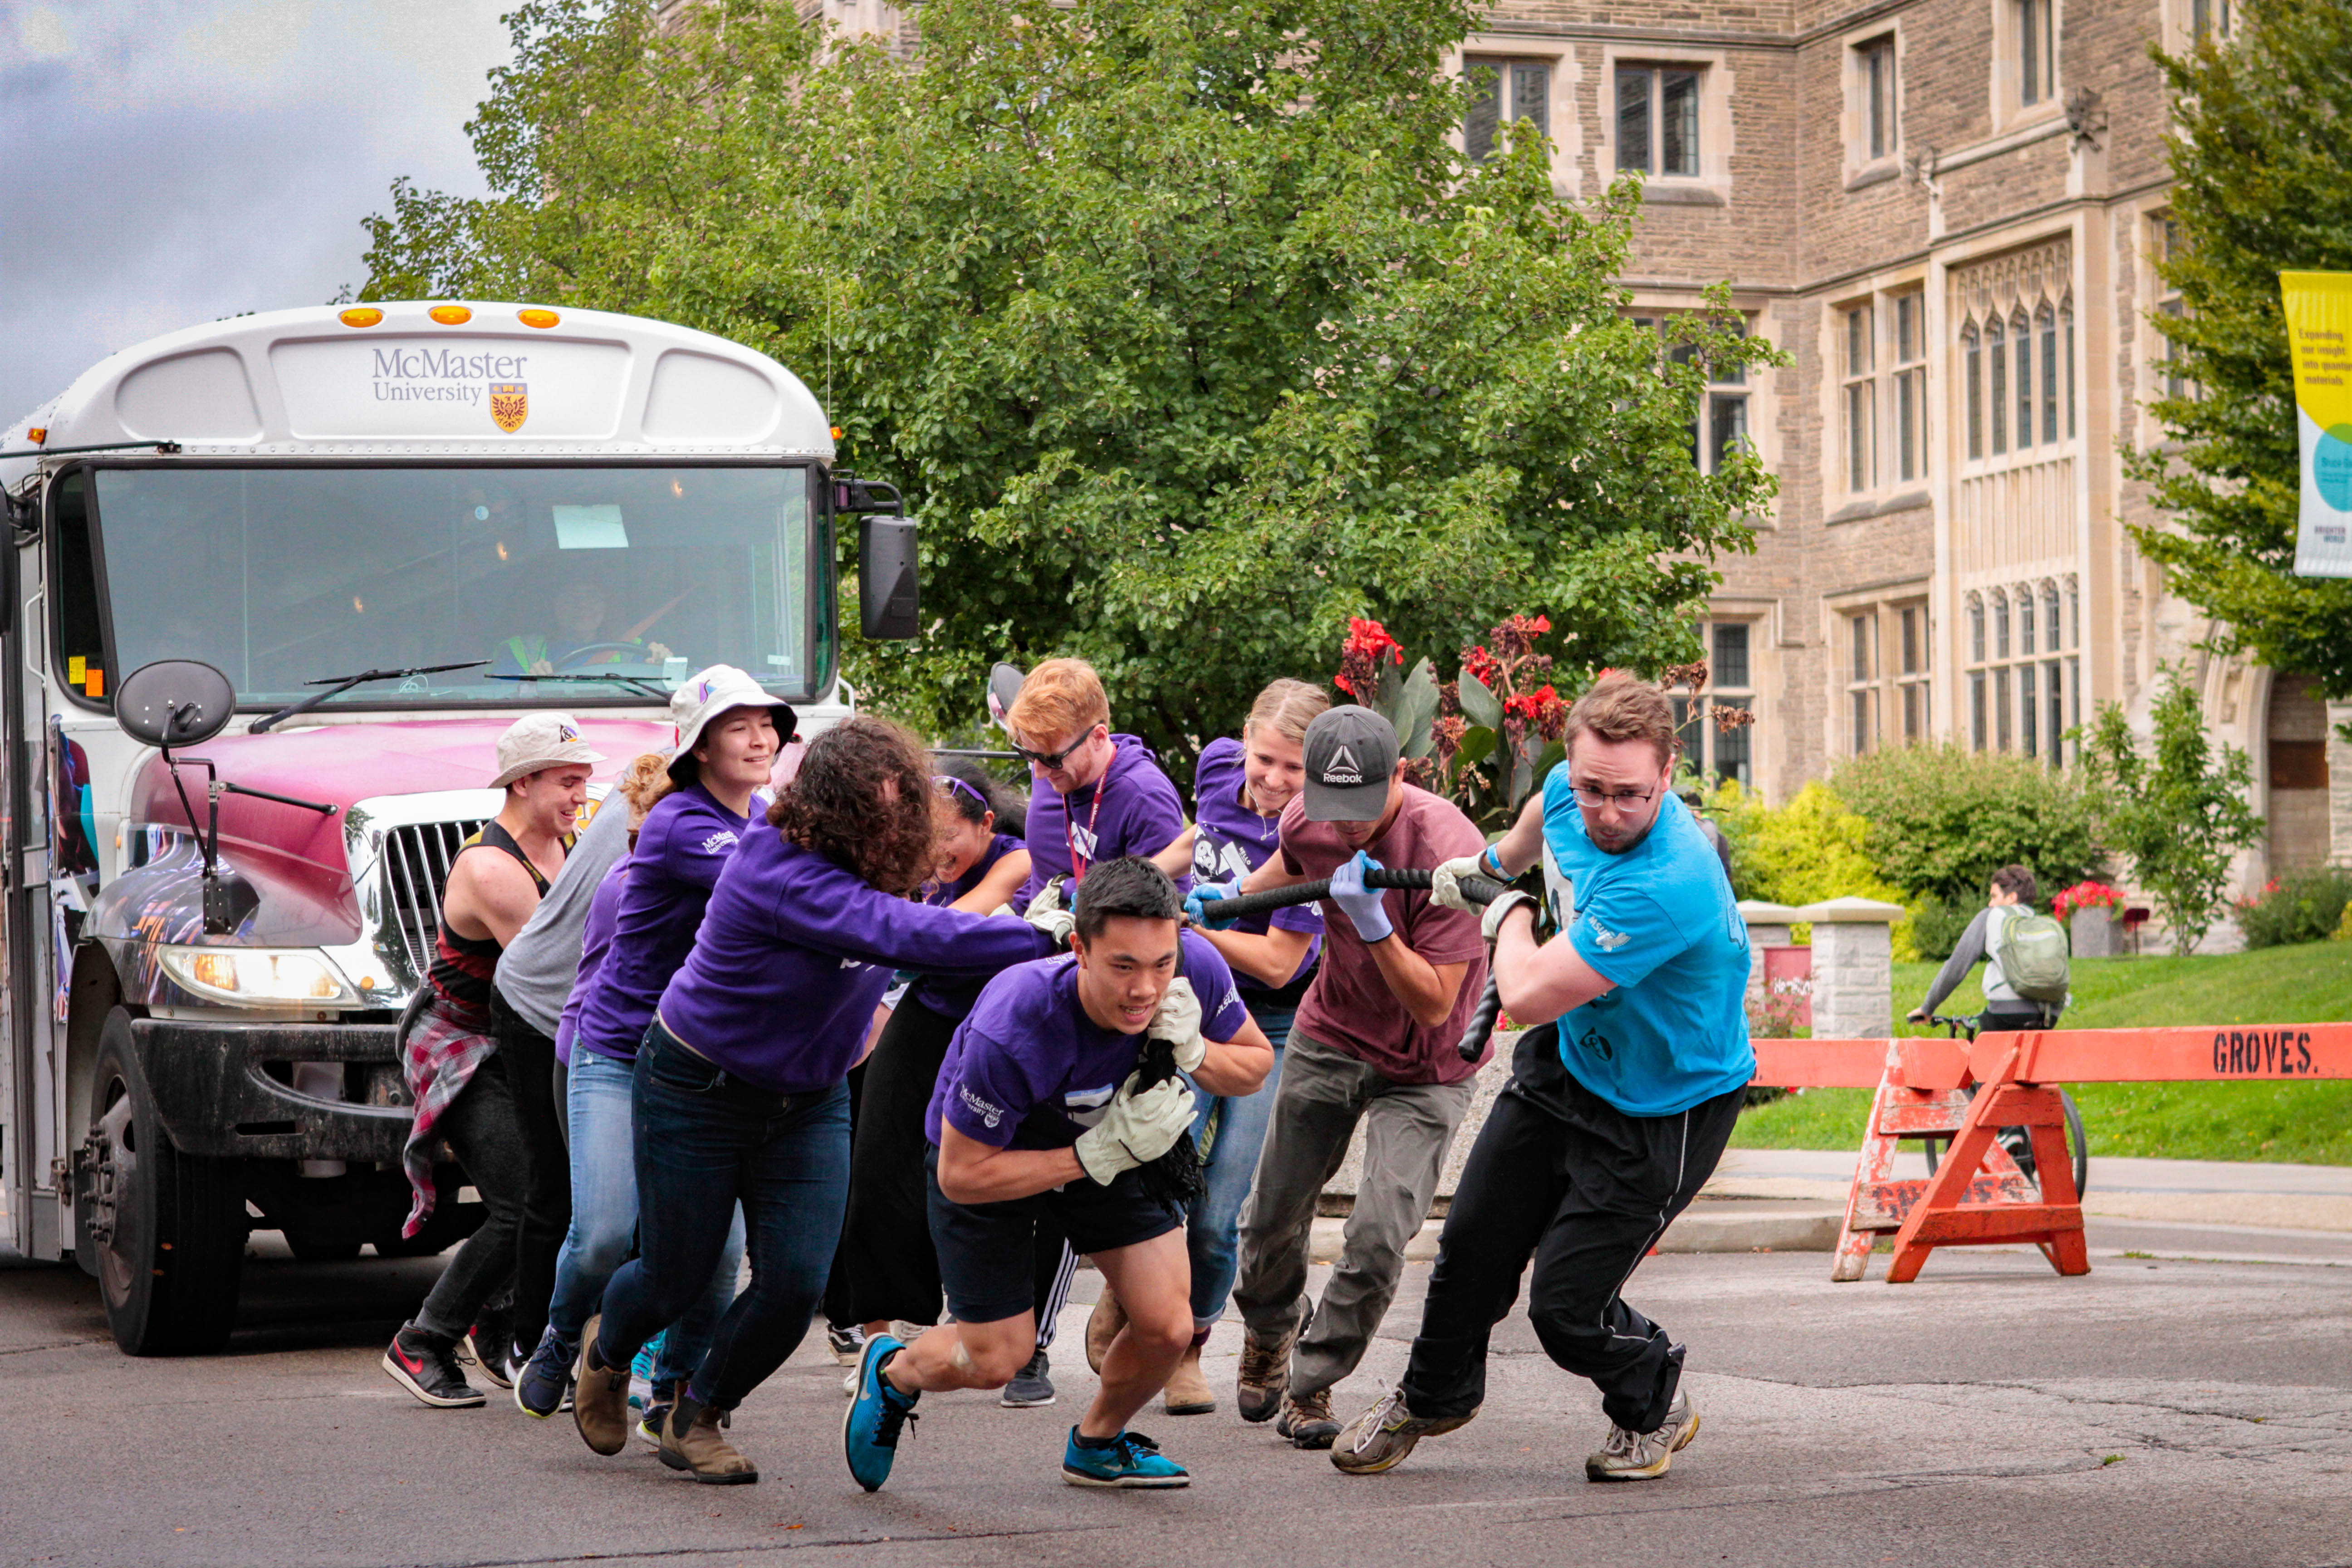 McMaster university employees pull McMaster bus as part of the United Way Campaign.